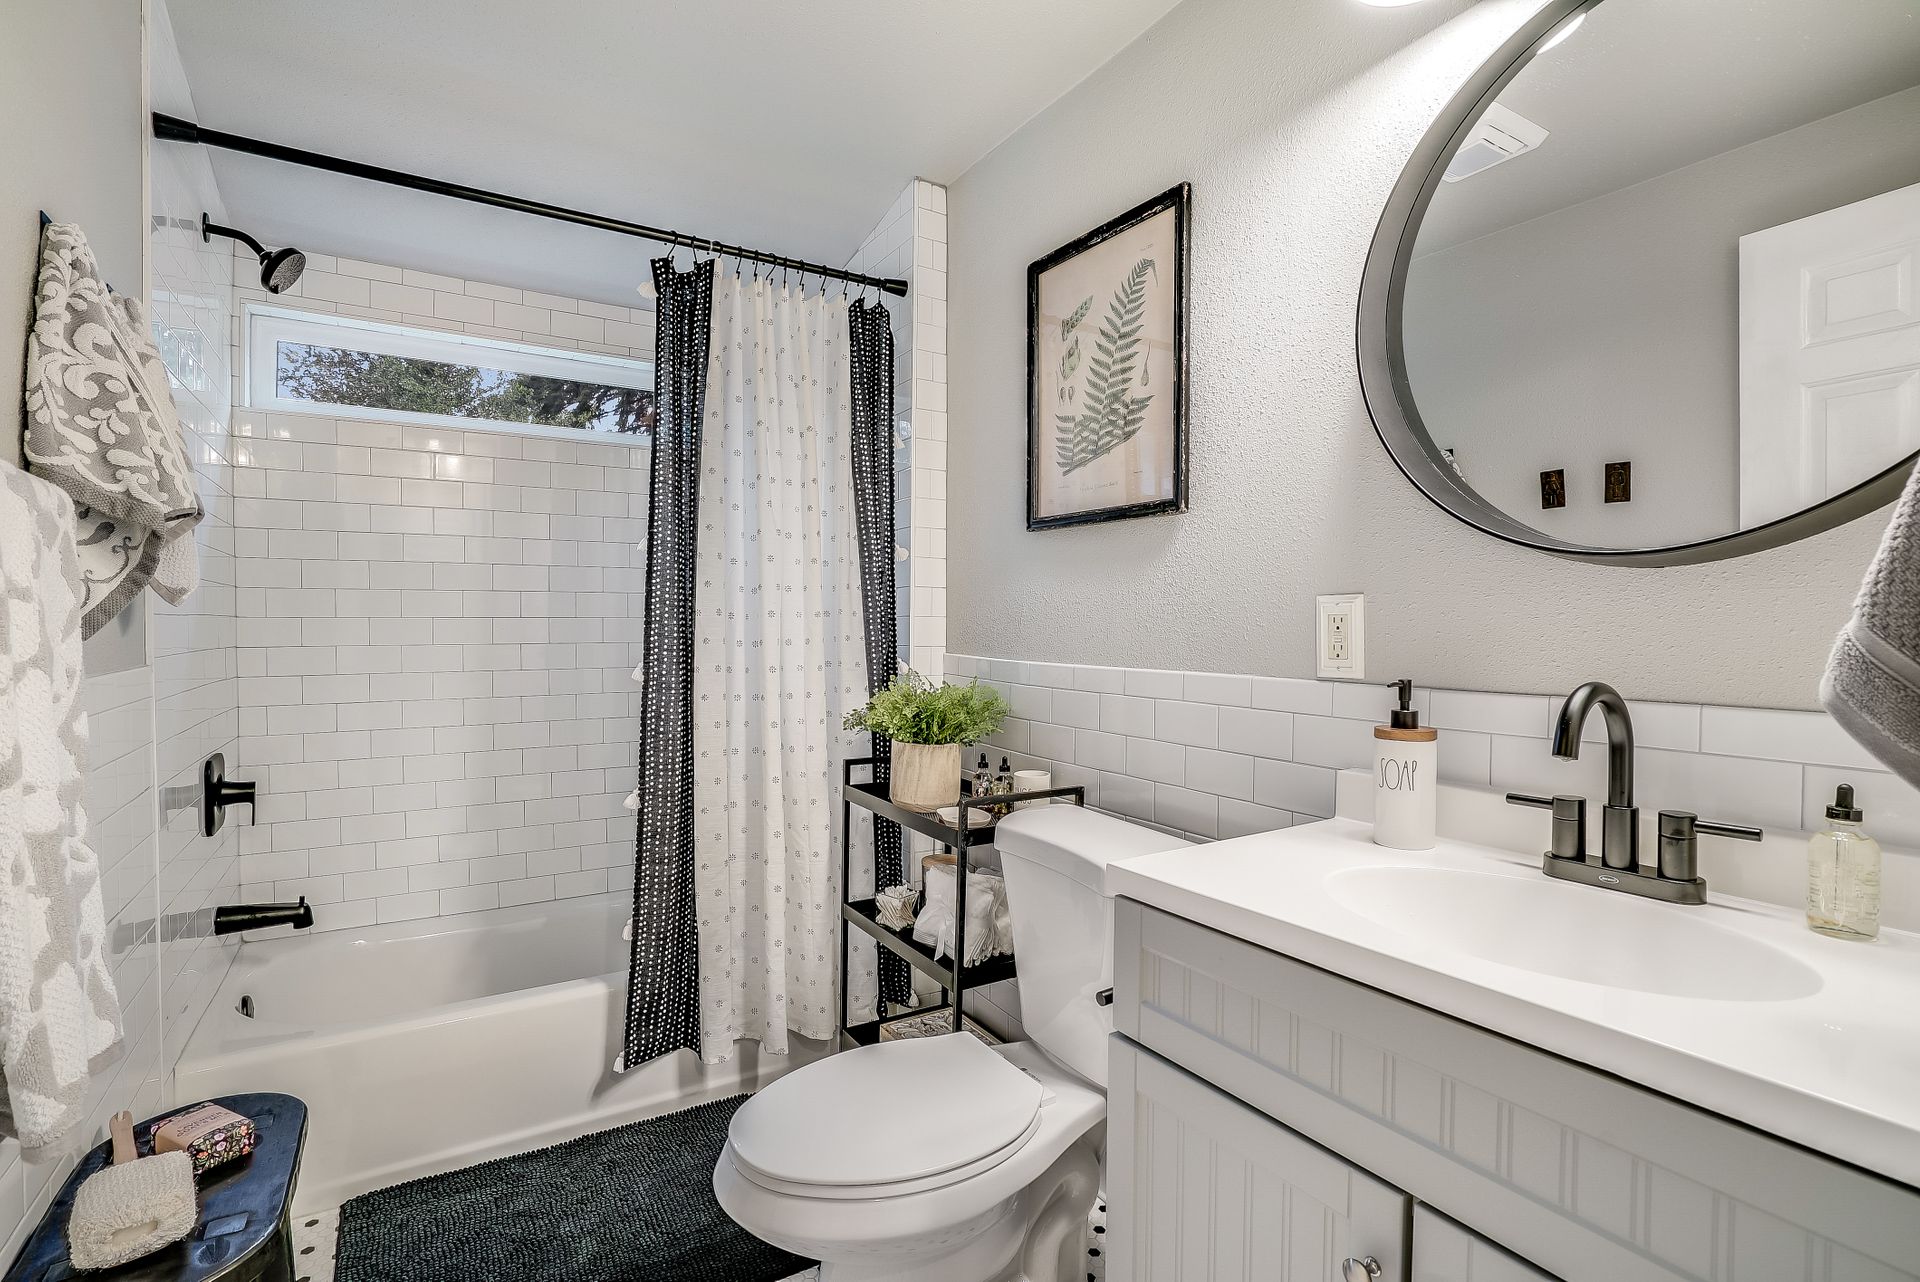 bathroom as seen in HGTV unsellable houses